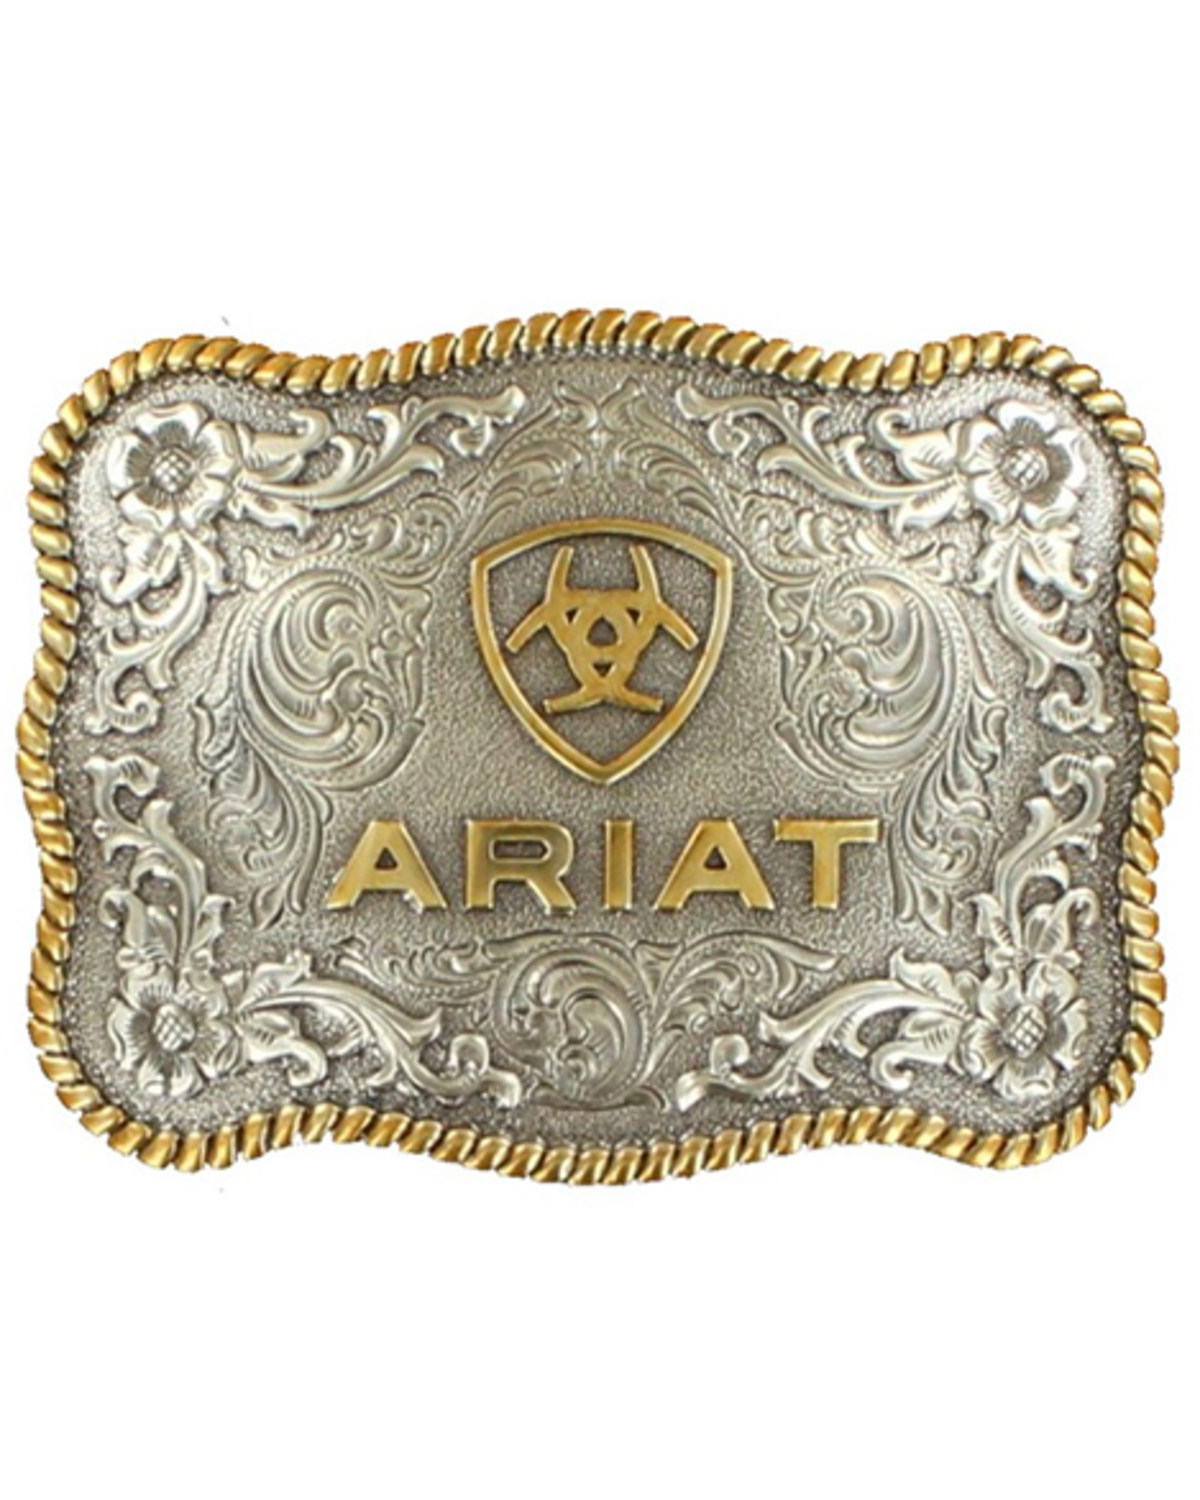 M & F Western Gold & Silver Scalloped Ariat Rope Edge Belt Buckle